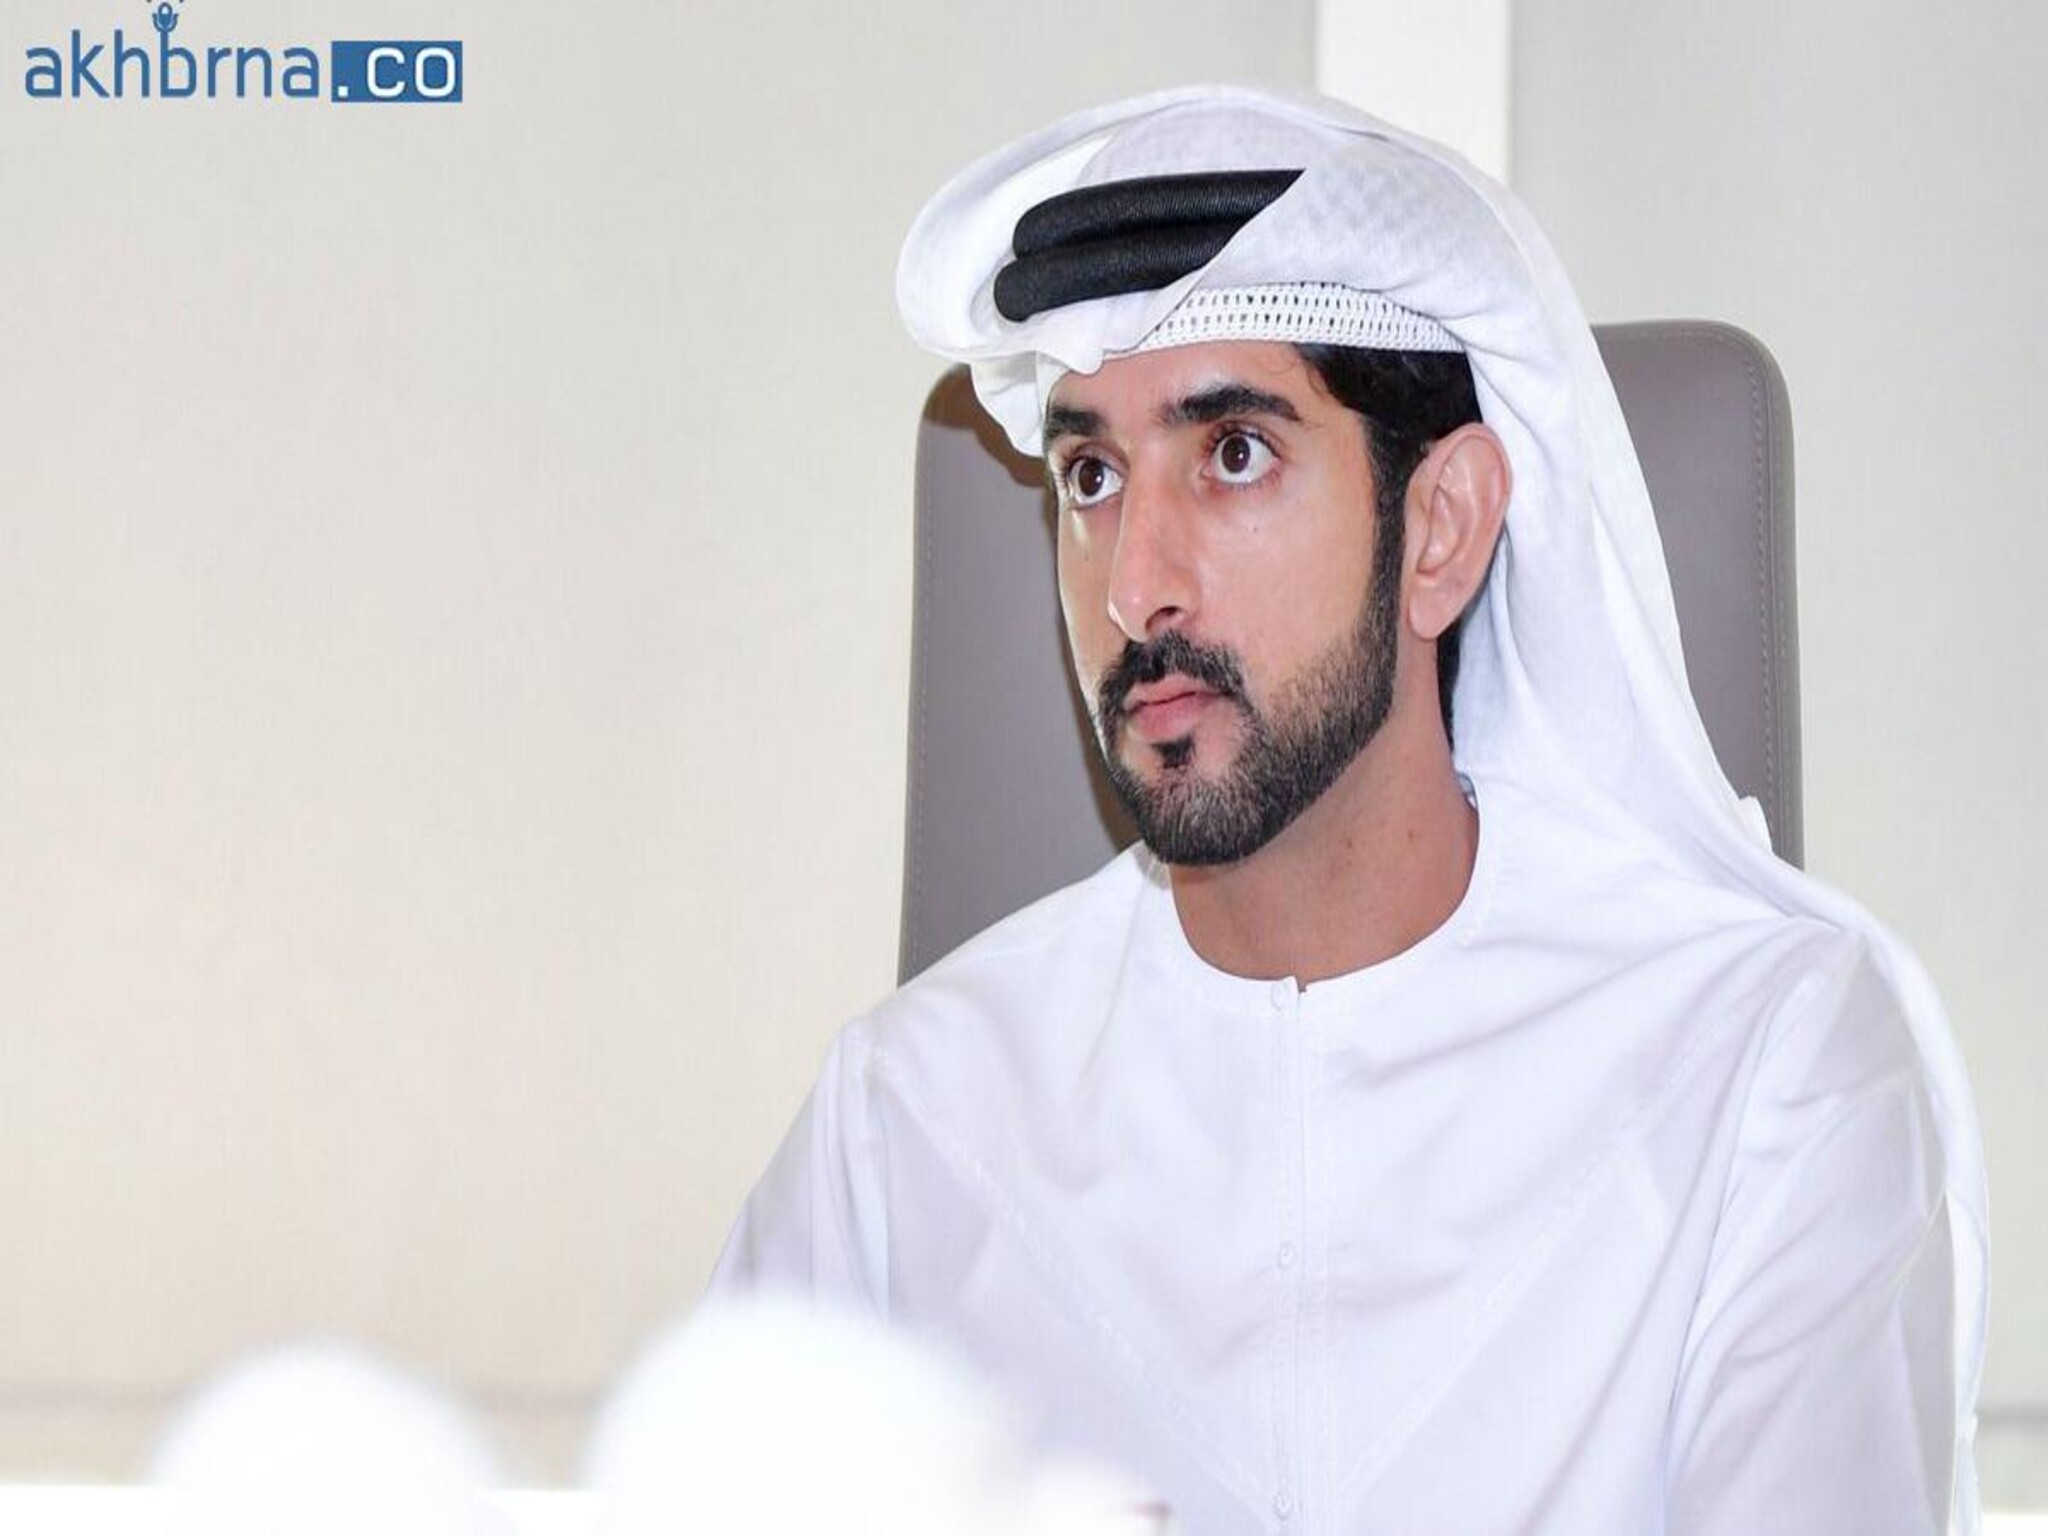 Dubai: Sheikh Hamdan Urges Government to take Action on Climate Extremes